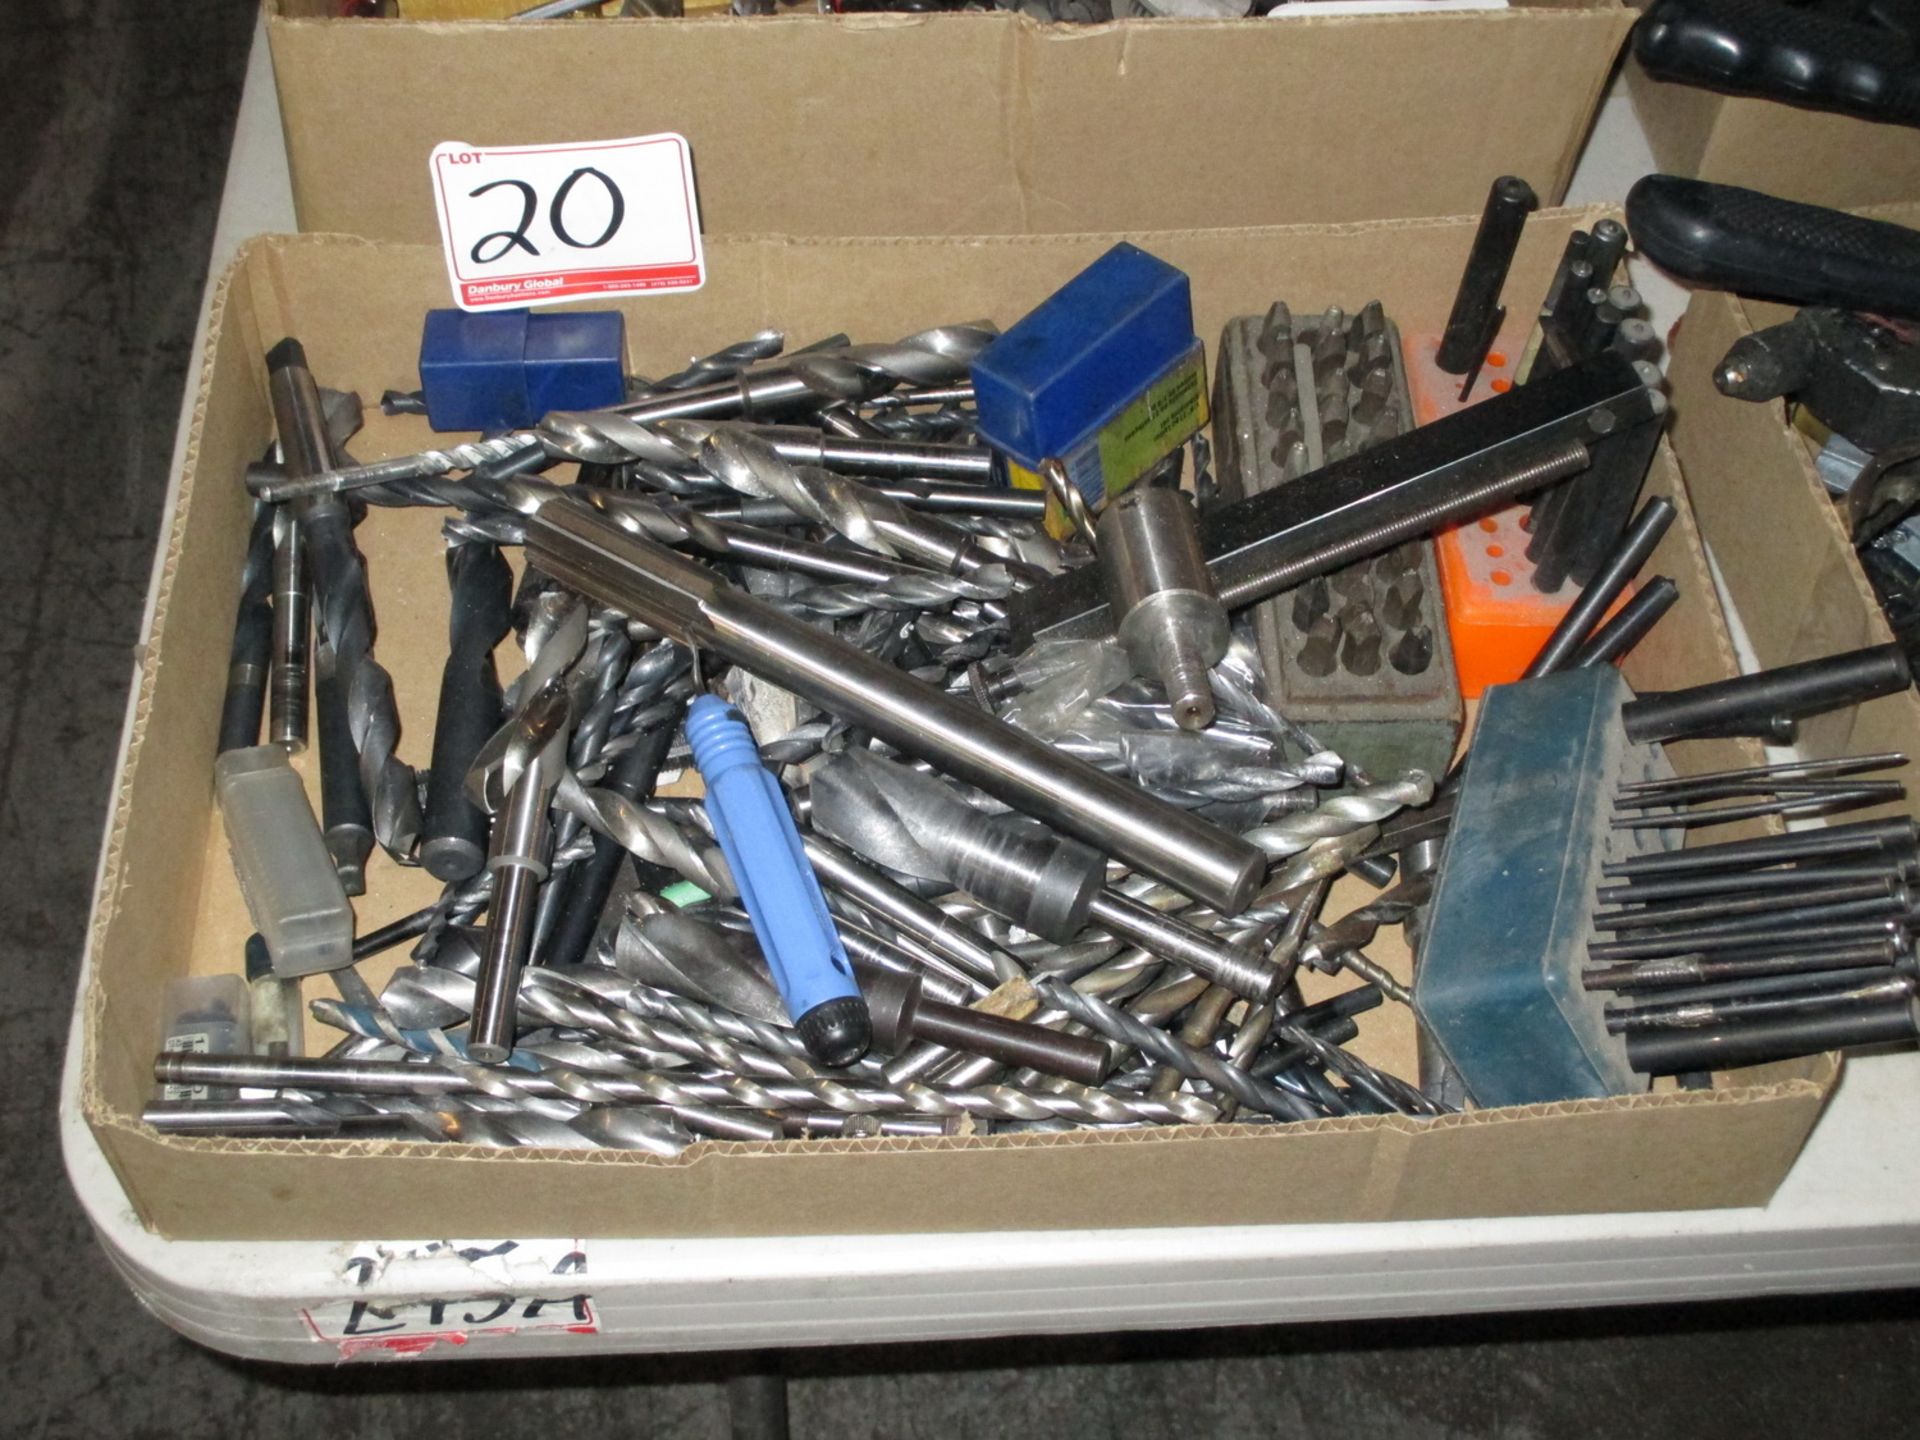 LOT - UNIVERSAL ASSTD DRILL BITS, GUIDES + # PUNCHES